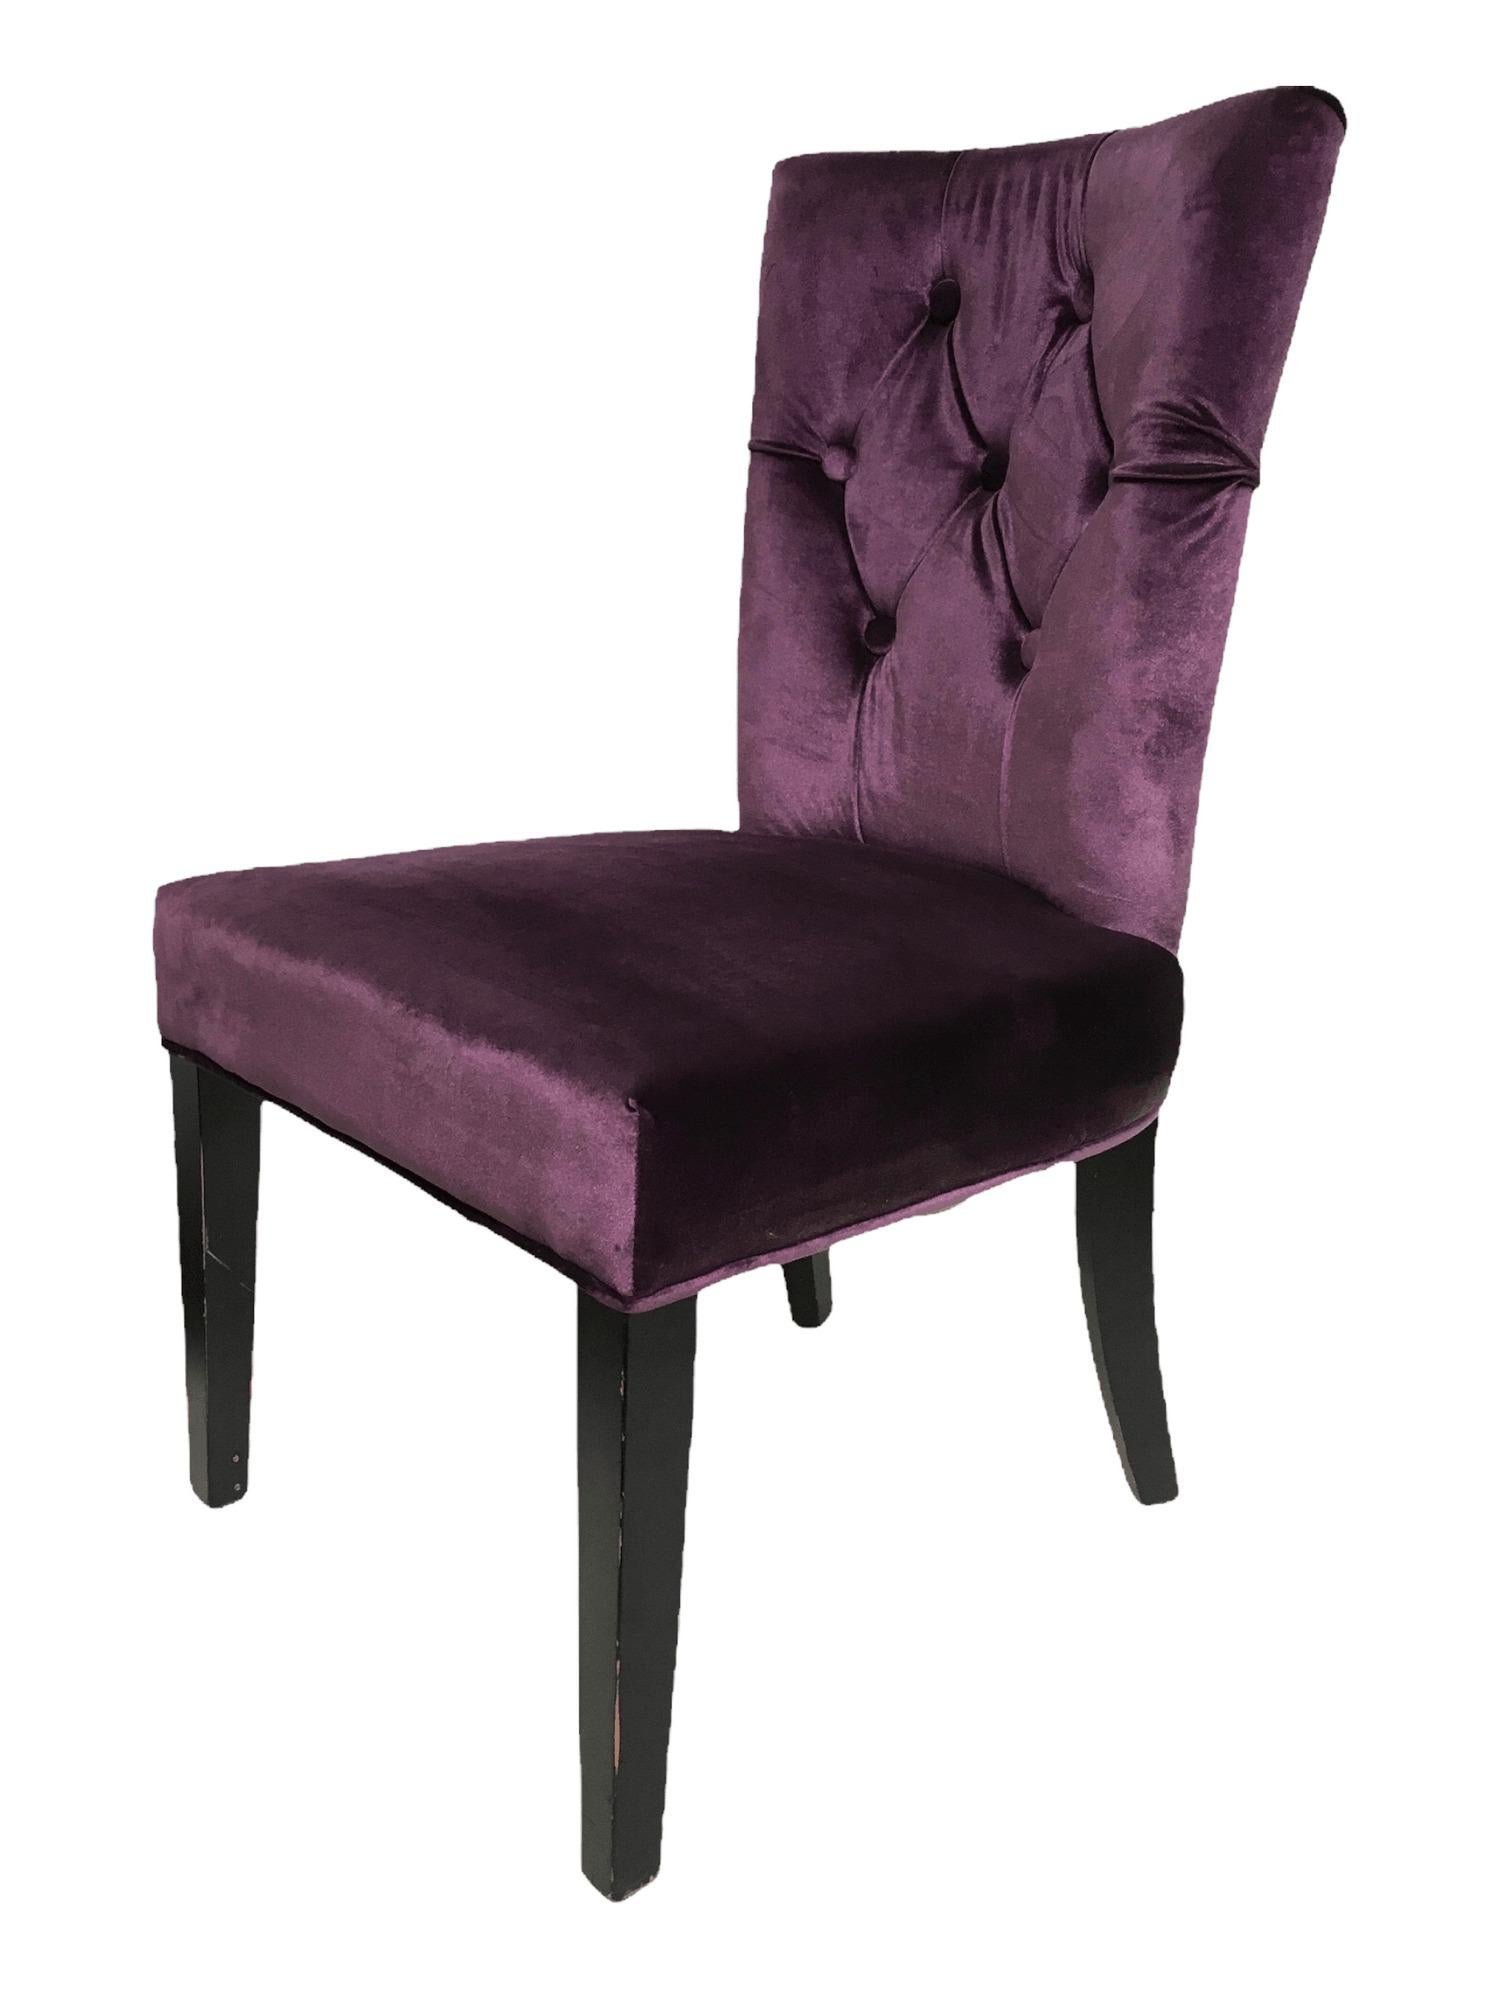 American Vintage Purple Velvet Chairs with Tufted Padded Backrest. Set of 2